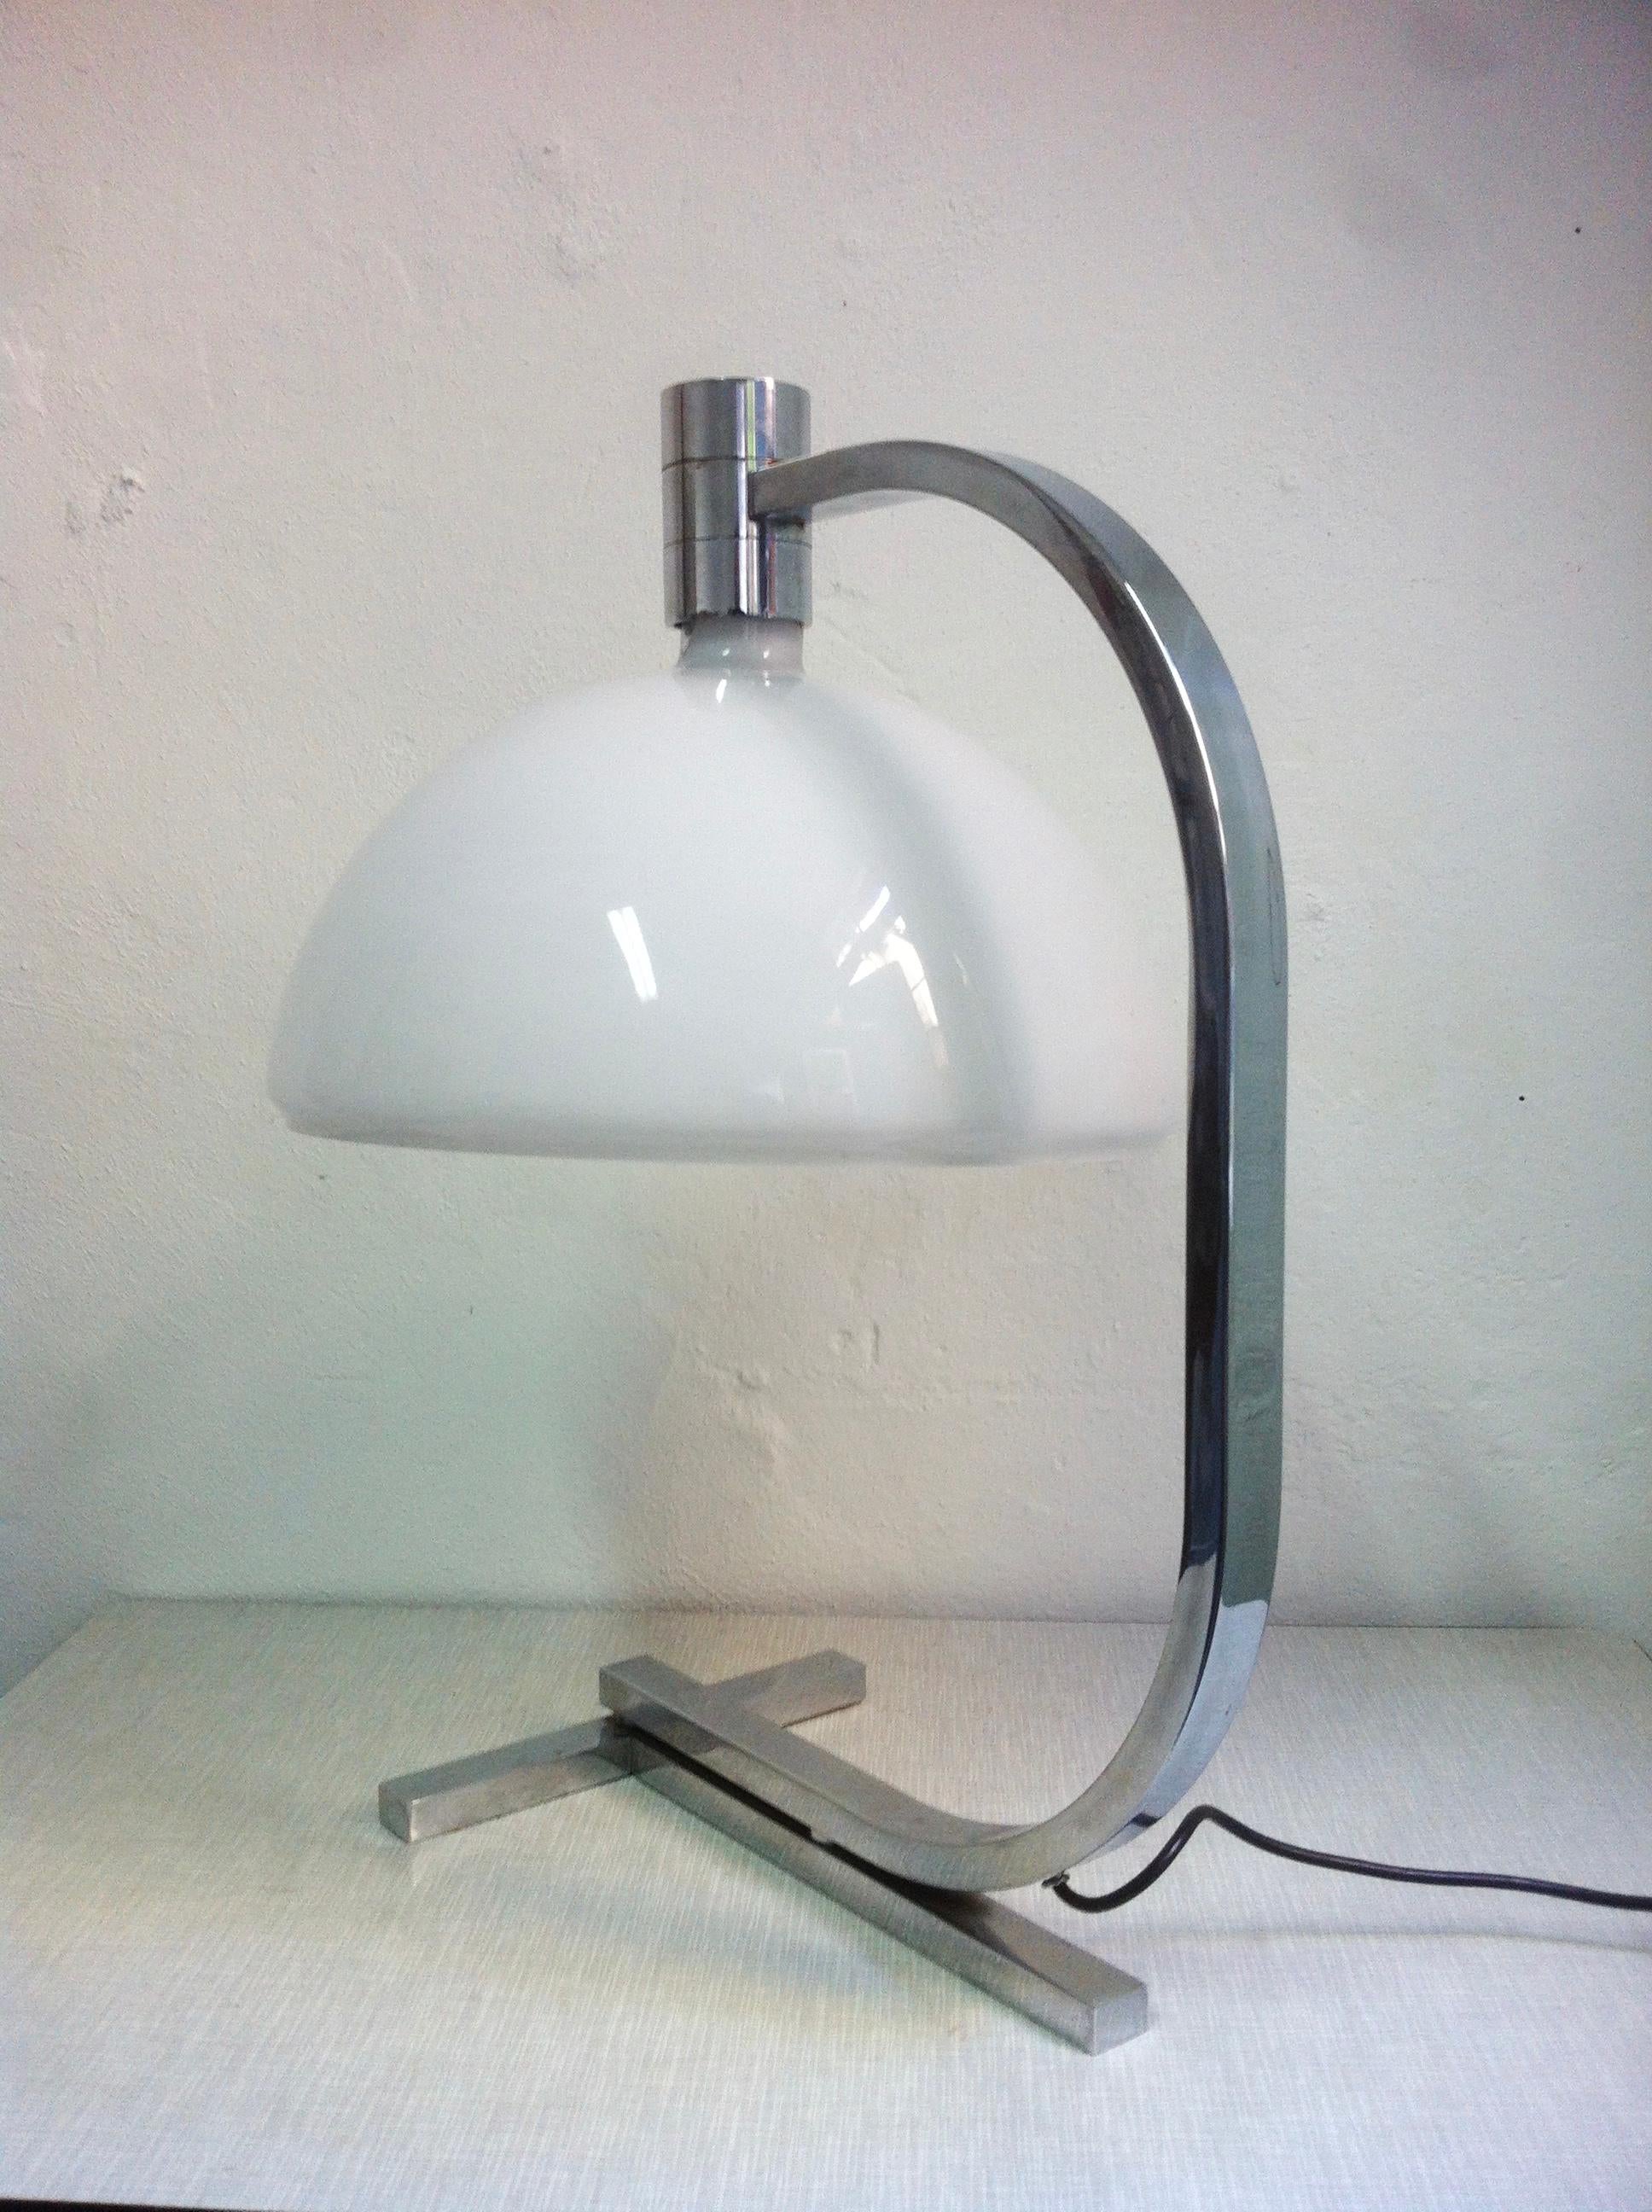 Mid-Century Modern Midcentury AM/AS Table Lamp by Helg, Piva, and Albini for Sirrah Large, 1969 For Sale